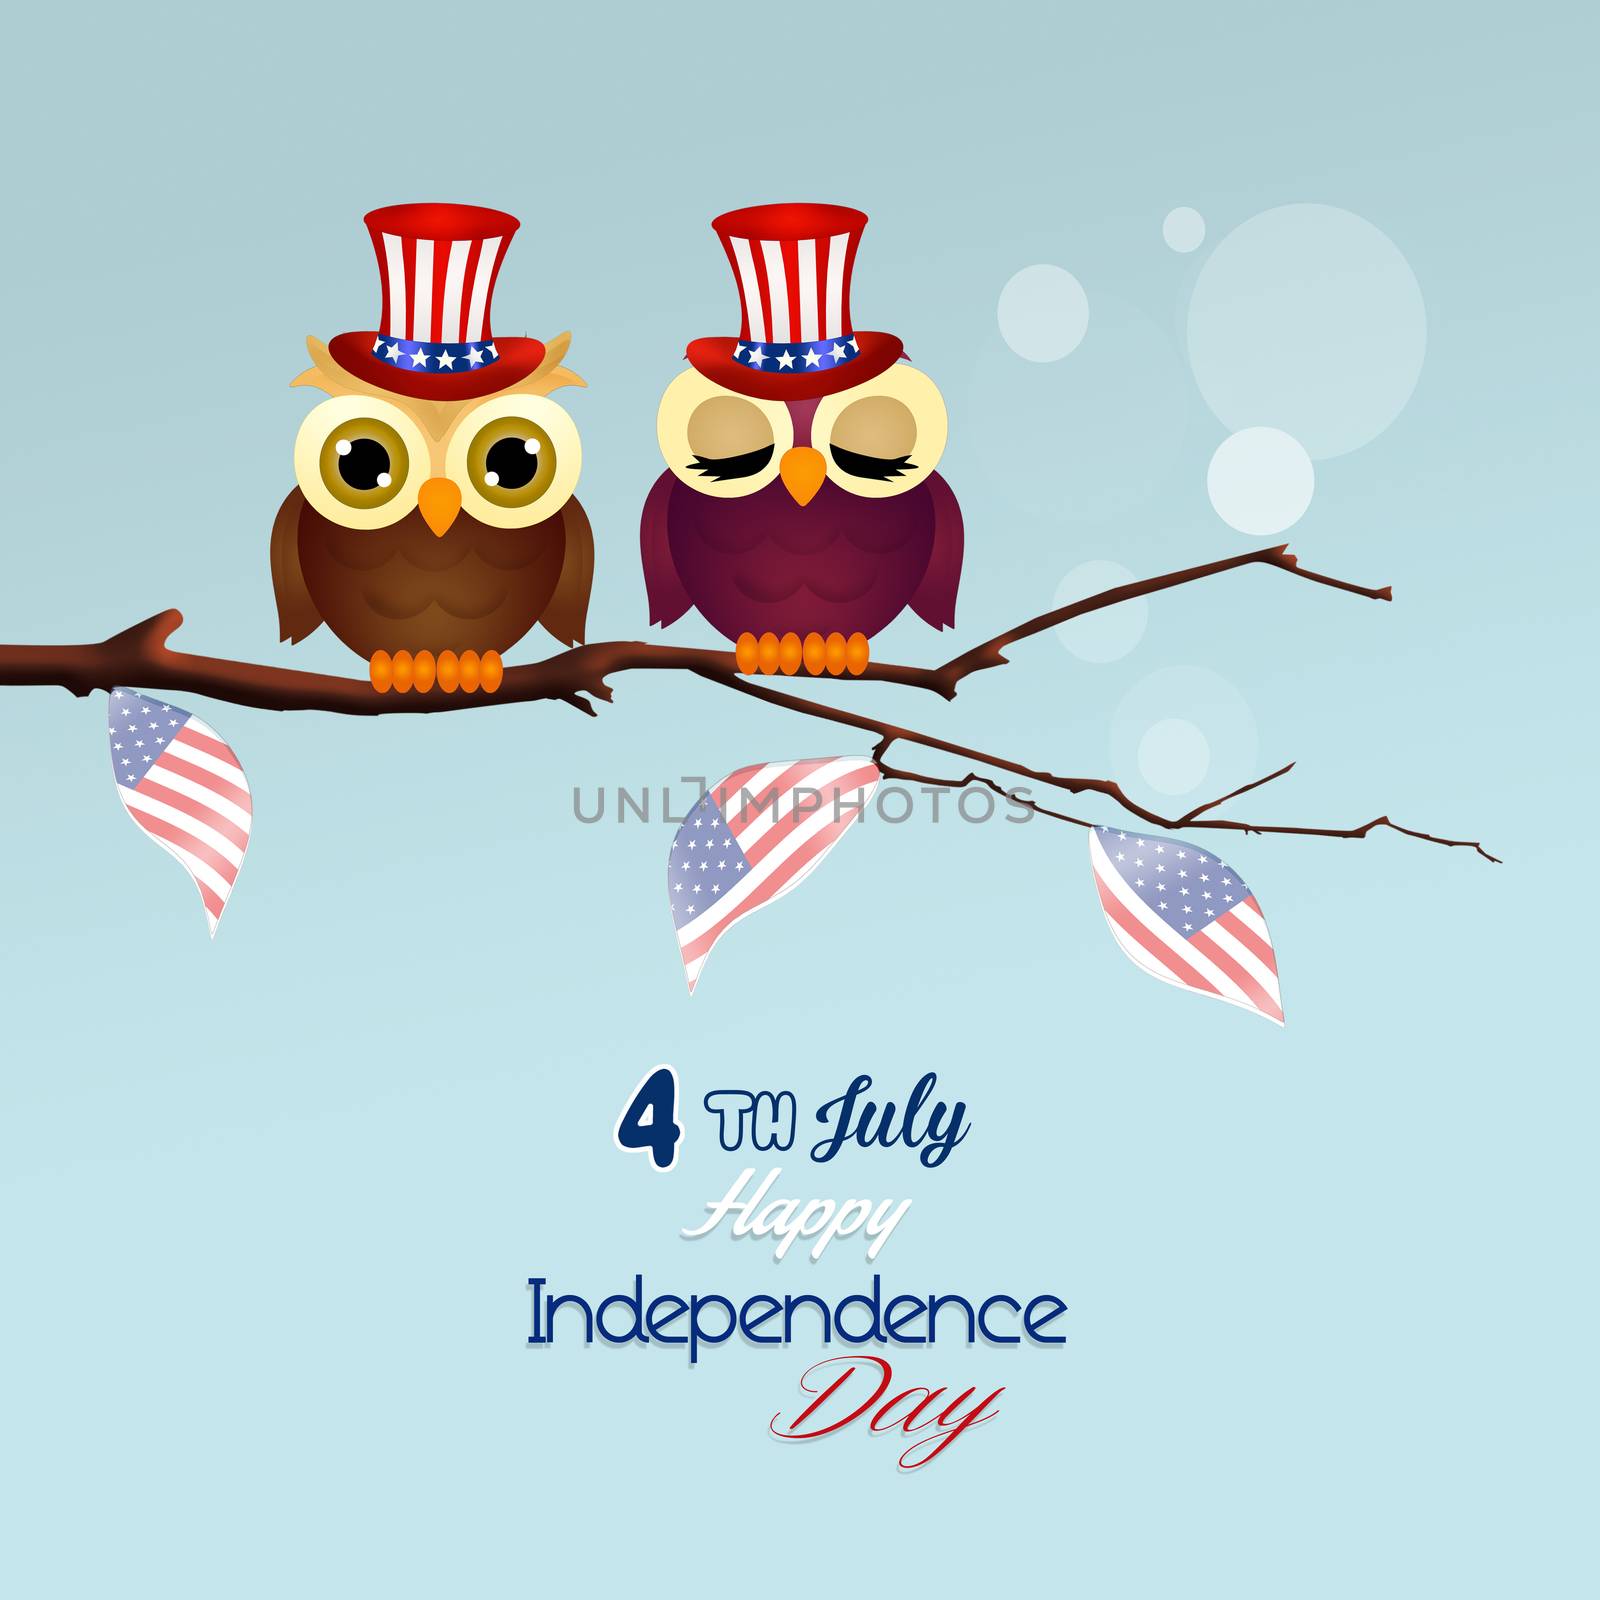 4th of July, Independence Day by adrenalina